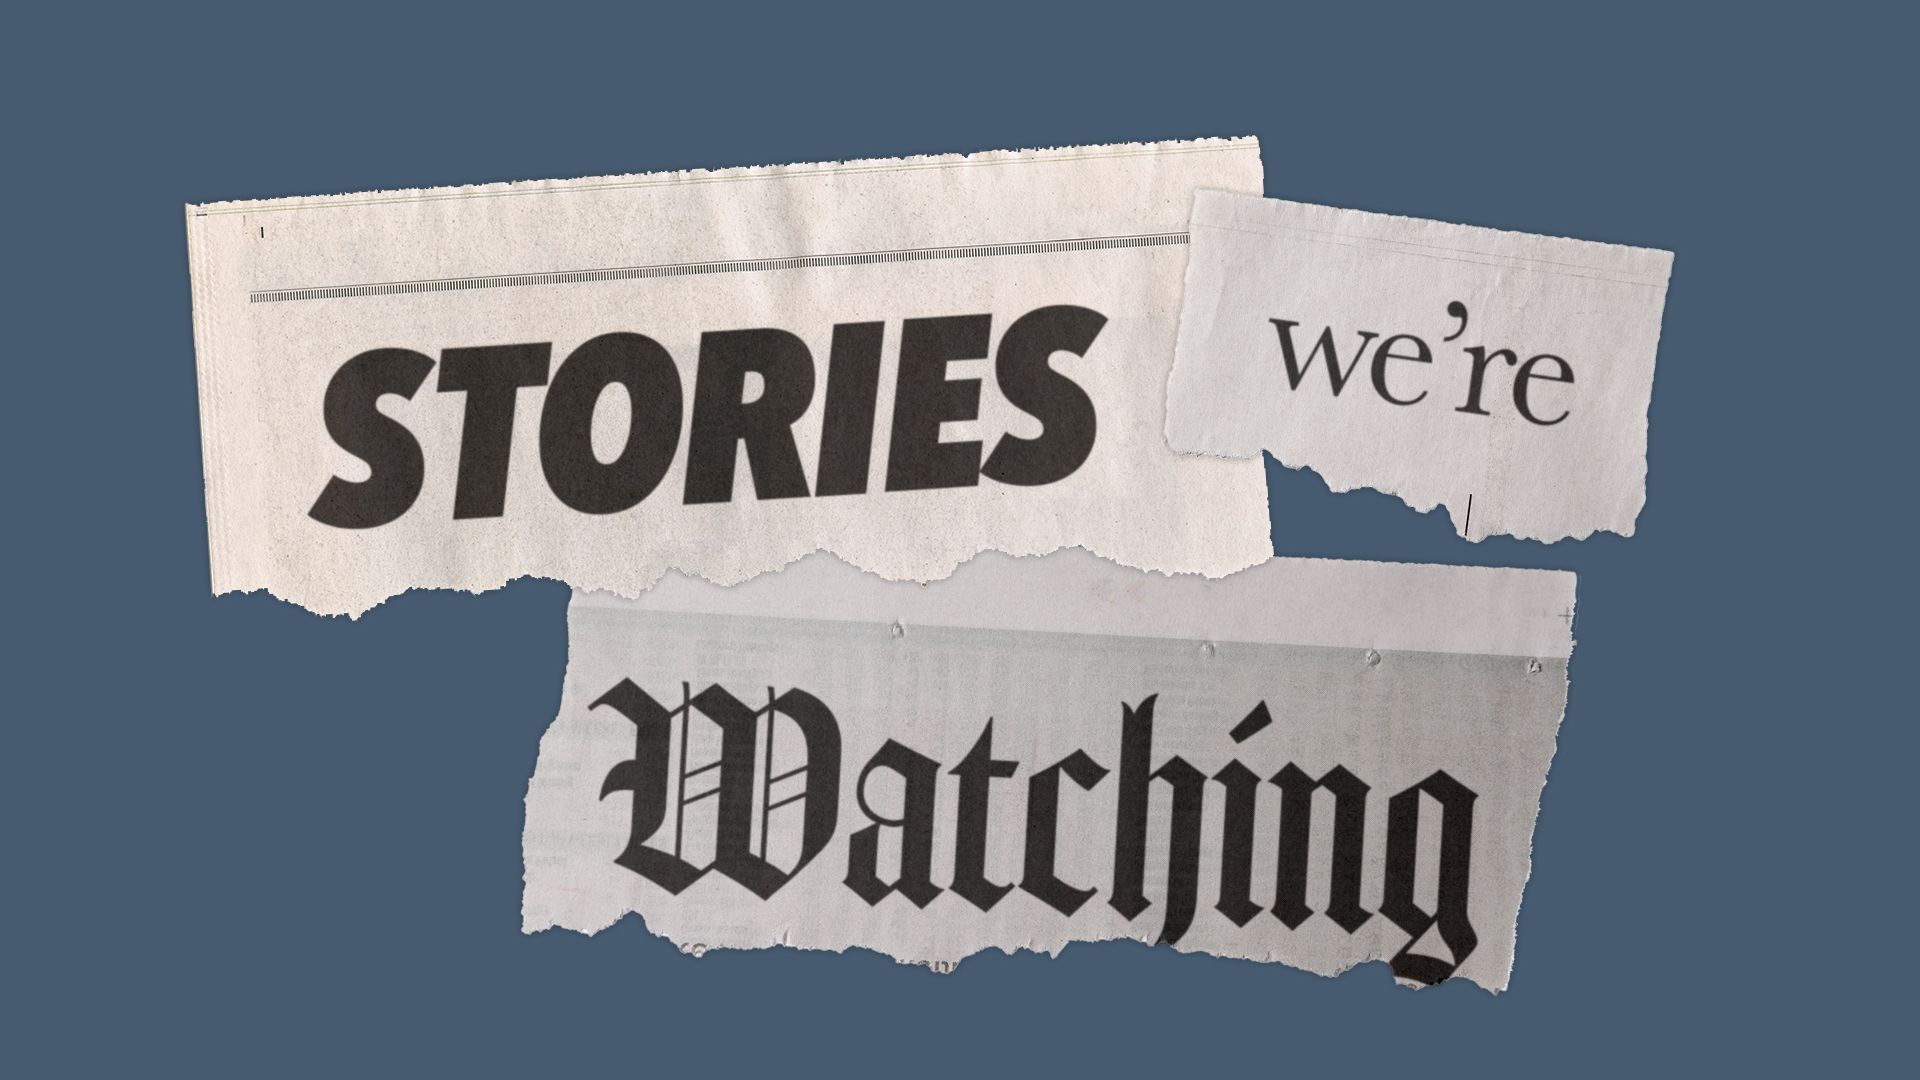 Illustration of torn newsprint that says Stories we're Watching